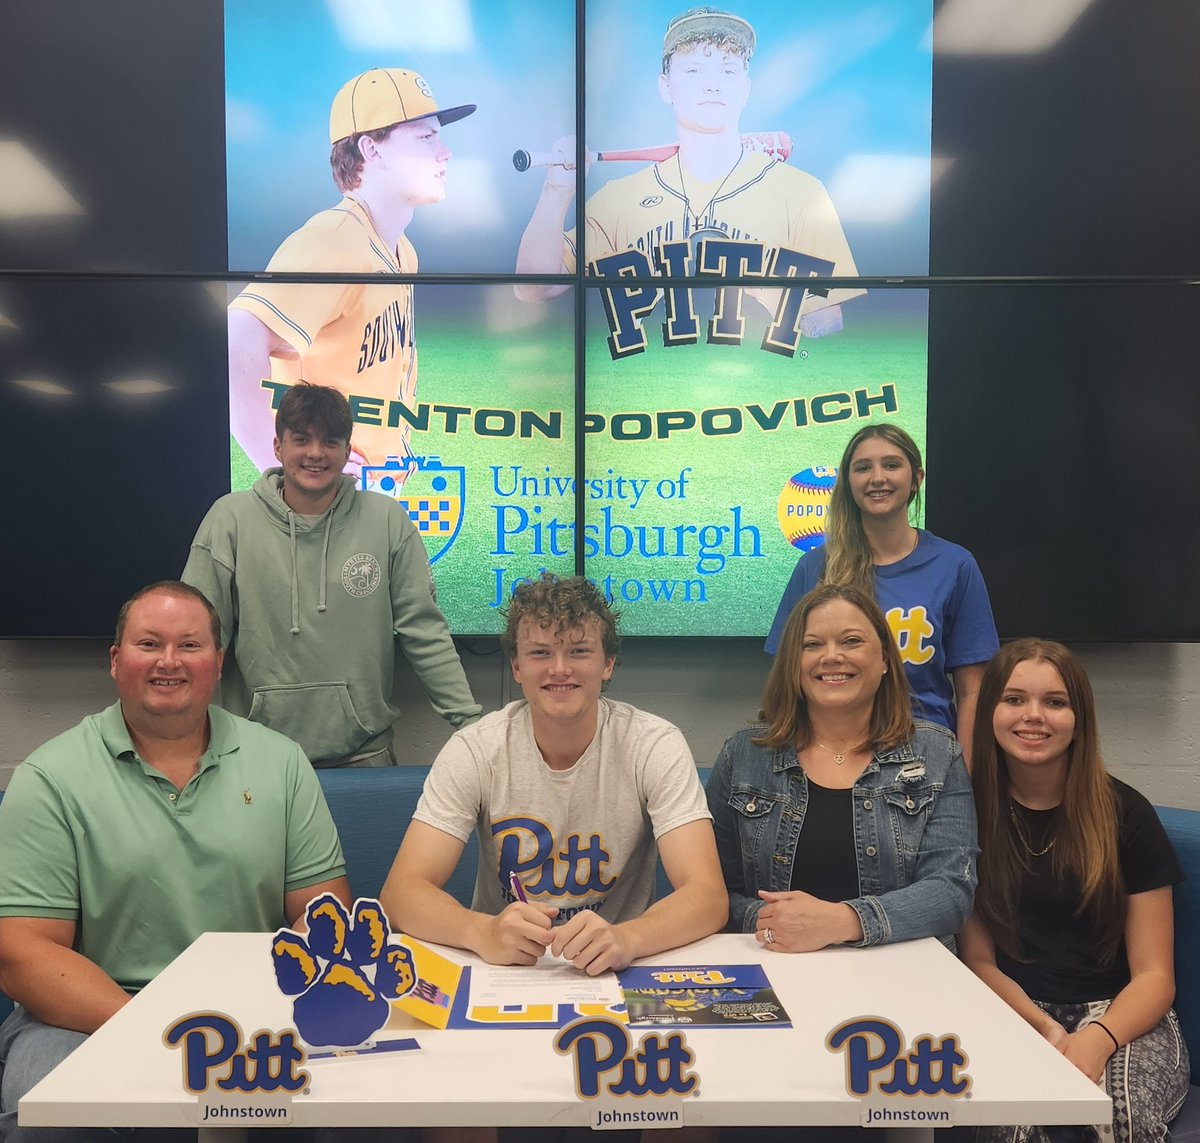 Trenton Popovich, a shining ⭐️ on & off baseball field, signed his Letter of Intent marking the beginning of an exciting new chapter in his academic & athletic journey at @PittJohnstown. Trenton's 🔥 for baseball was ignited at age 8 by watching @andrewmccutchen of @Pirates